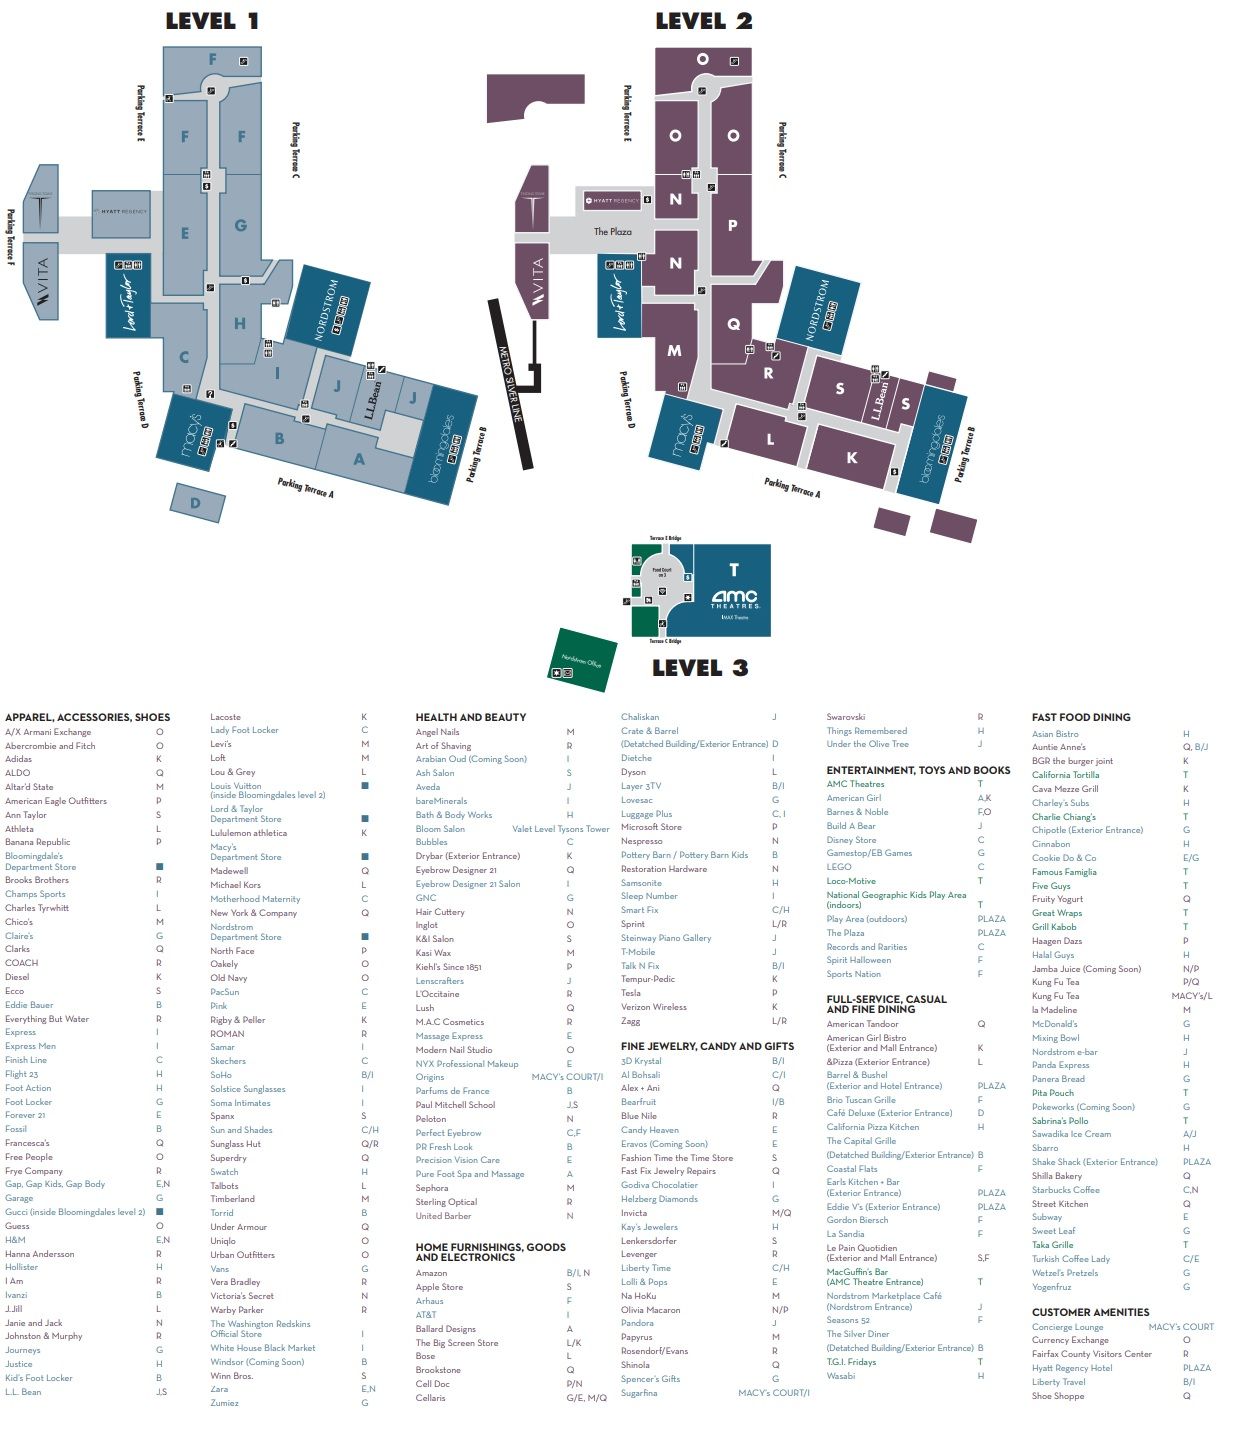 Tysons Galleria Directory & Map